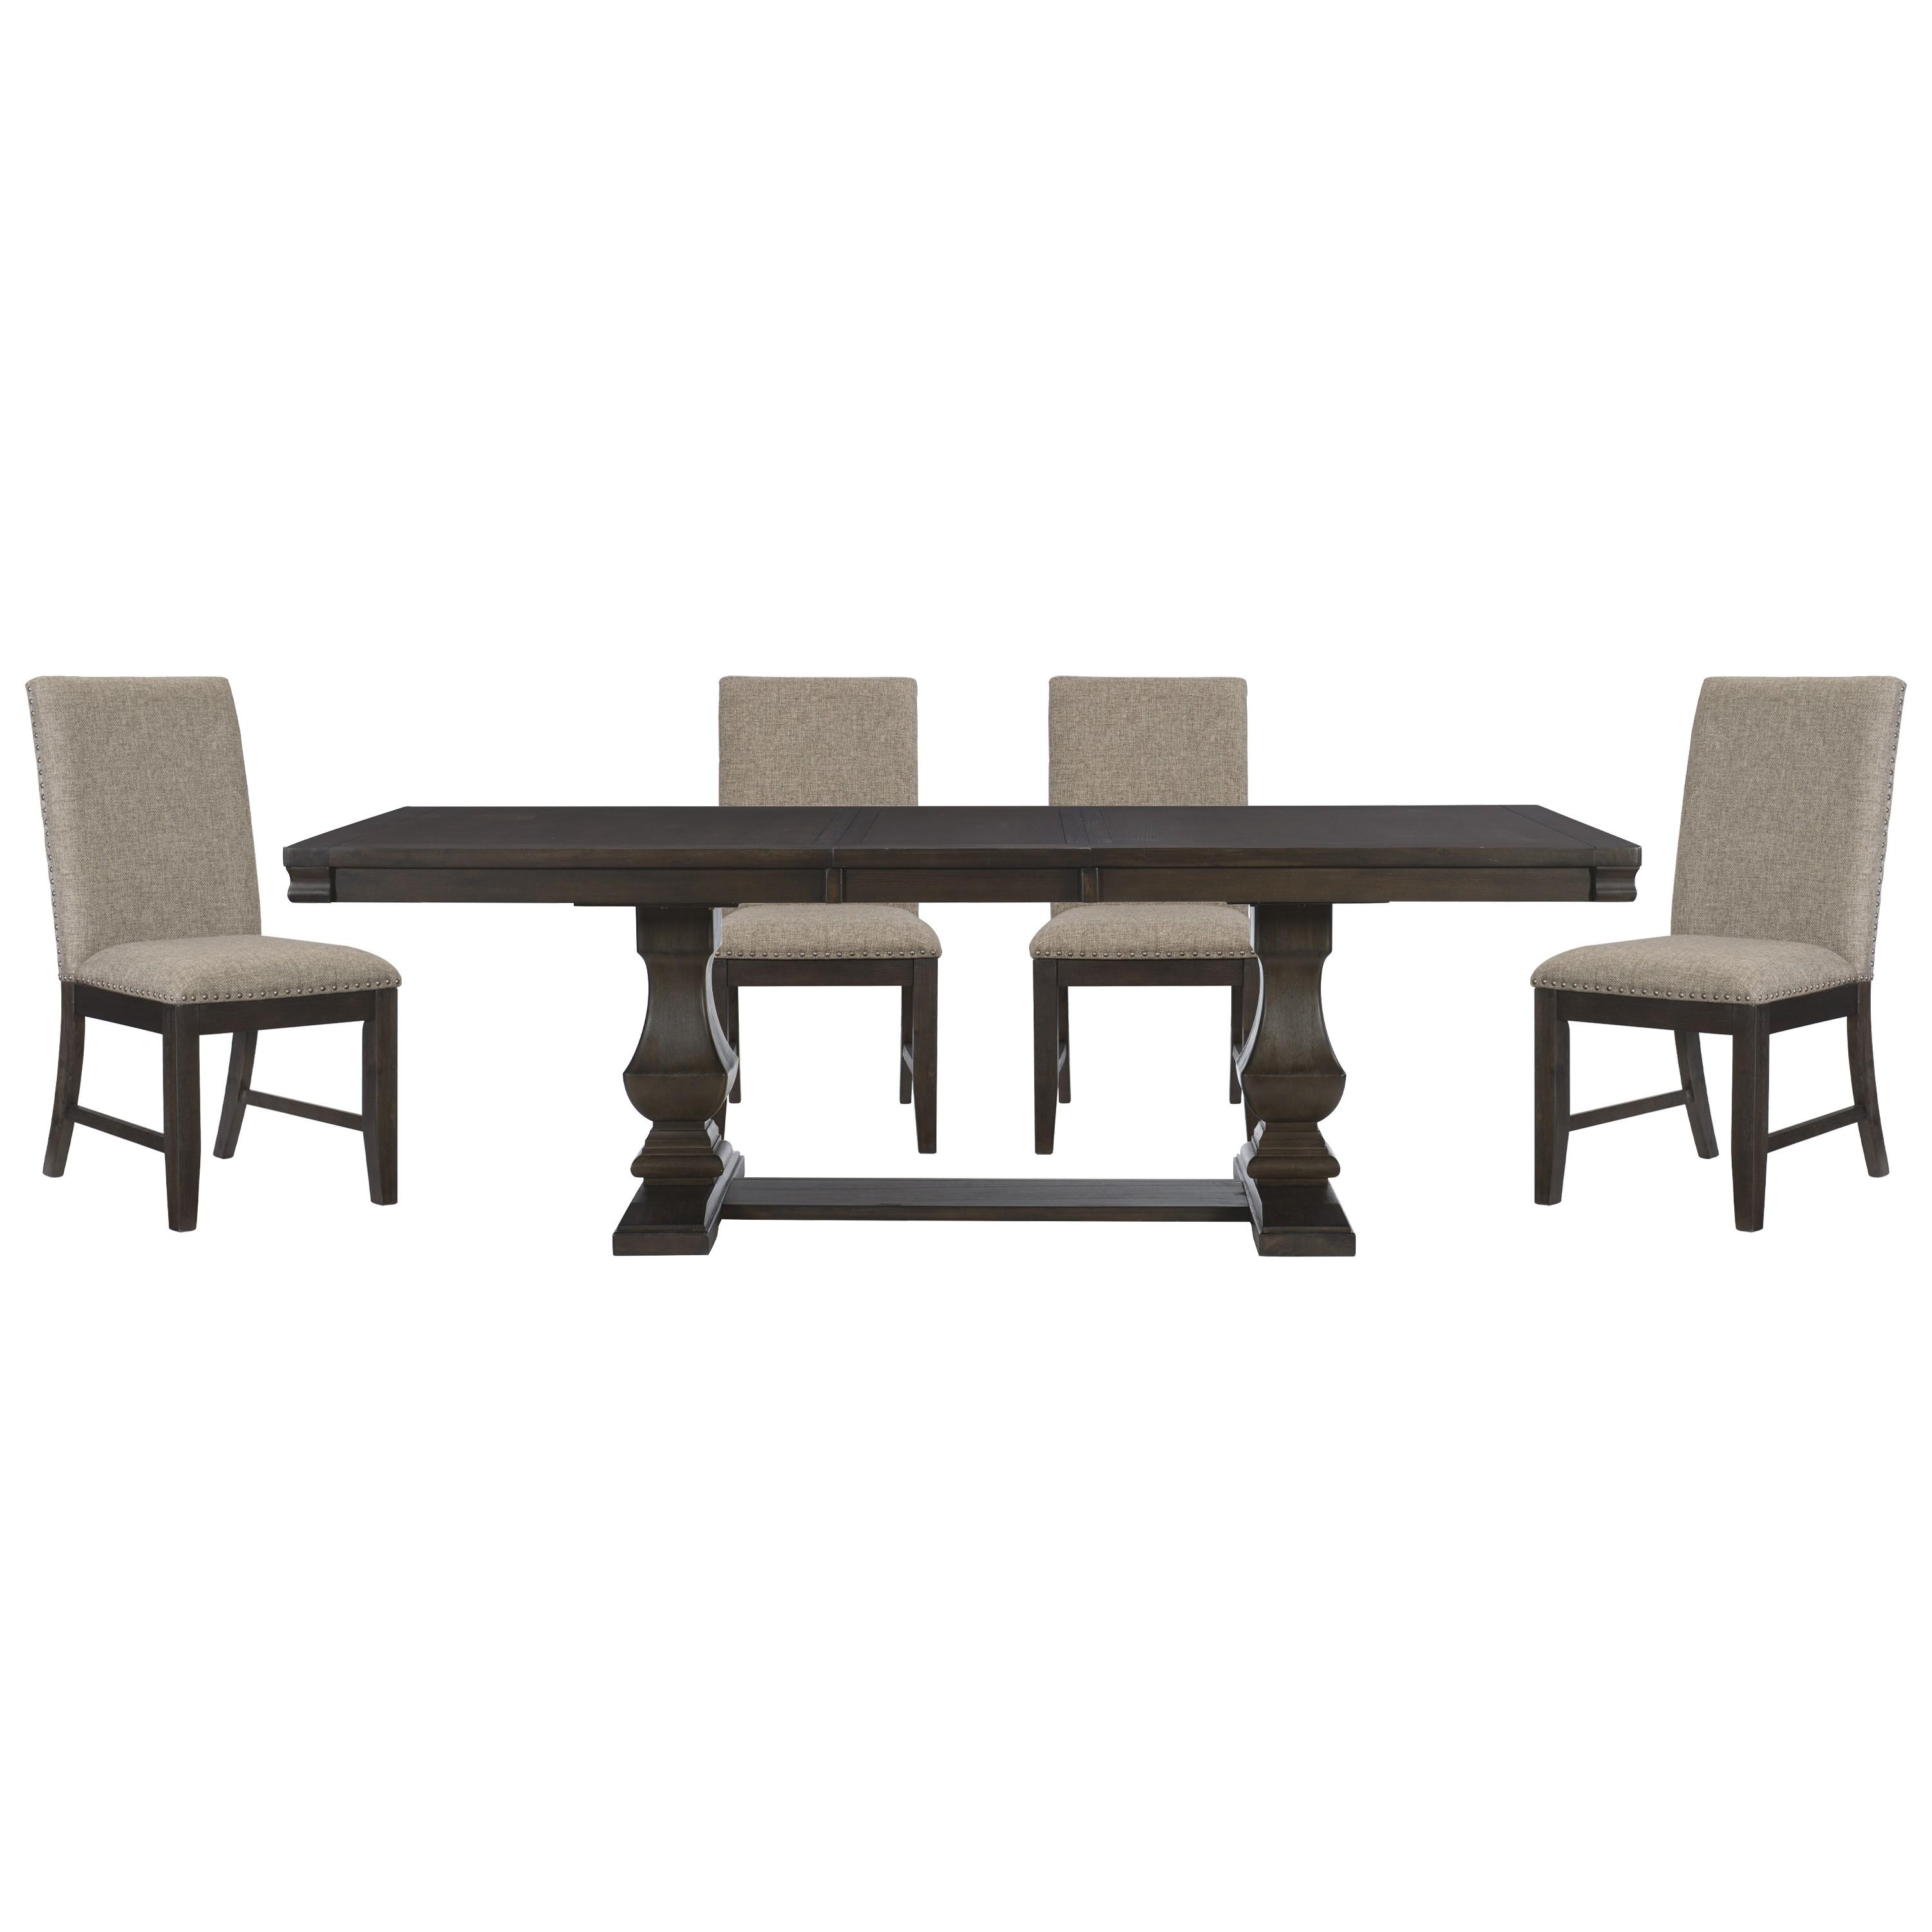 Traditional Dining Room Set 5741-94*5PC Southlake 5741-94*5PC in Rustic Brown Polyester